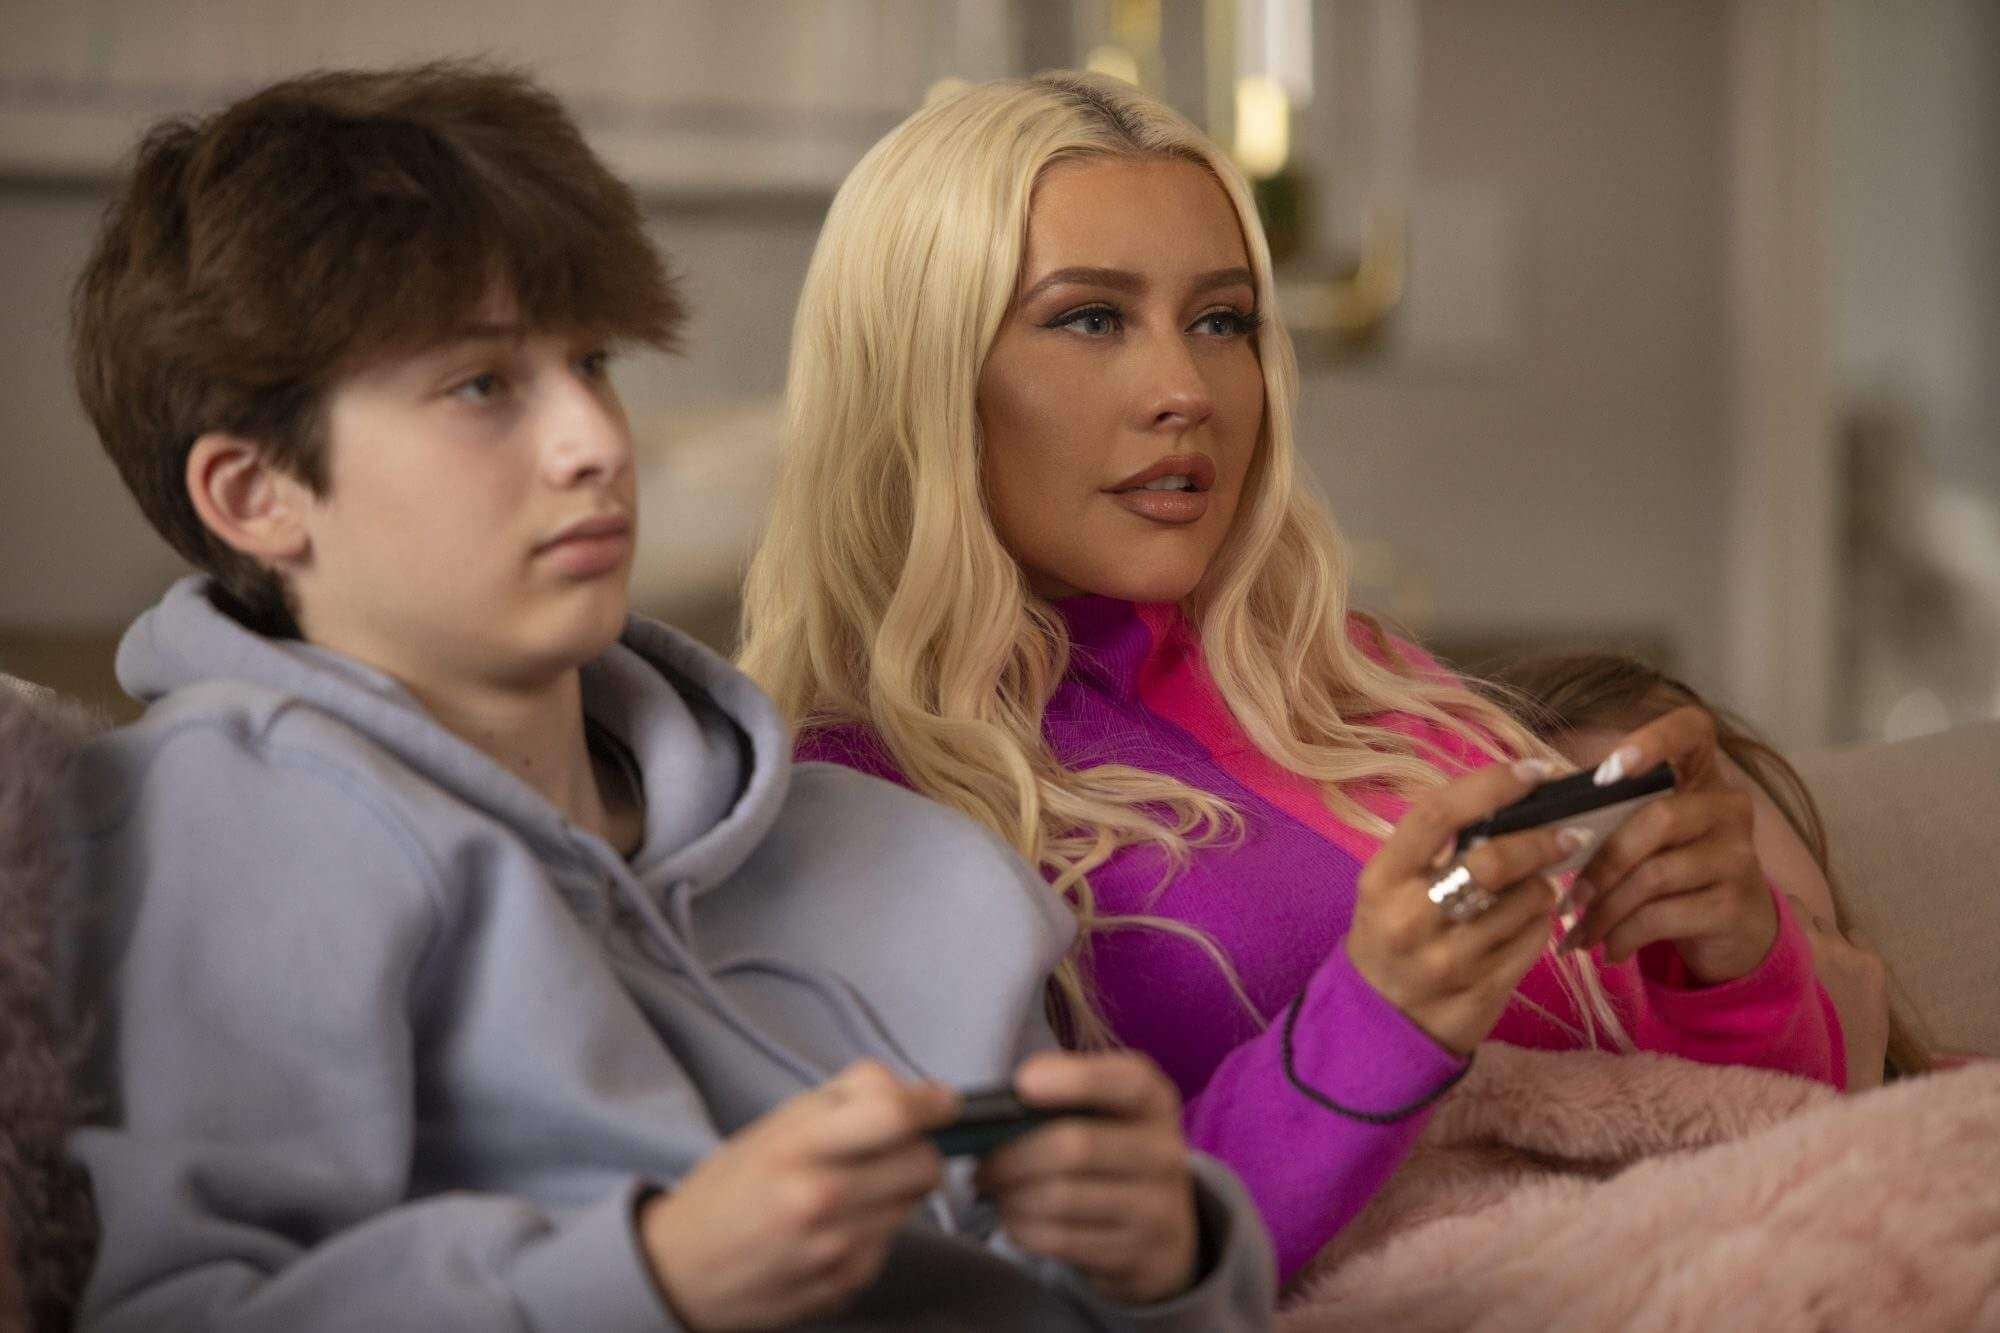 Exclusive: Christina Aguilera talks about her passion for video games and her life as a mom